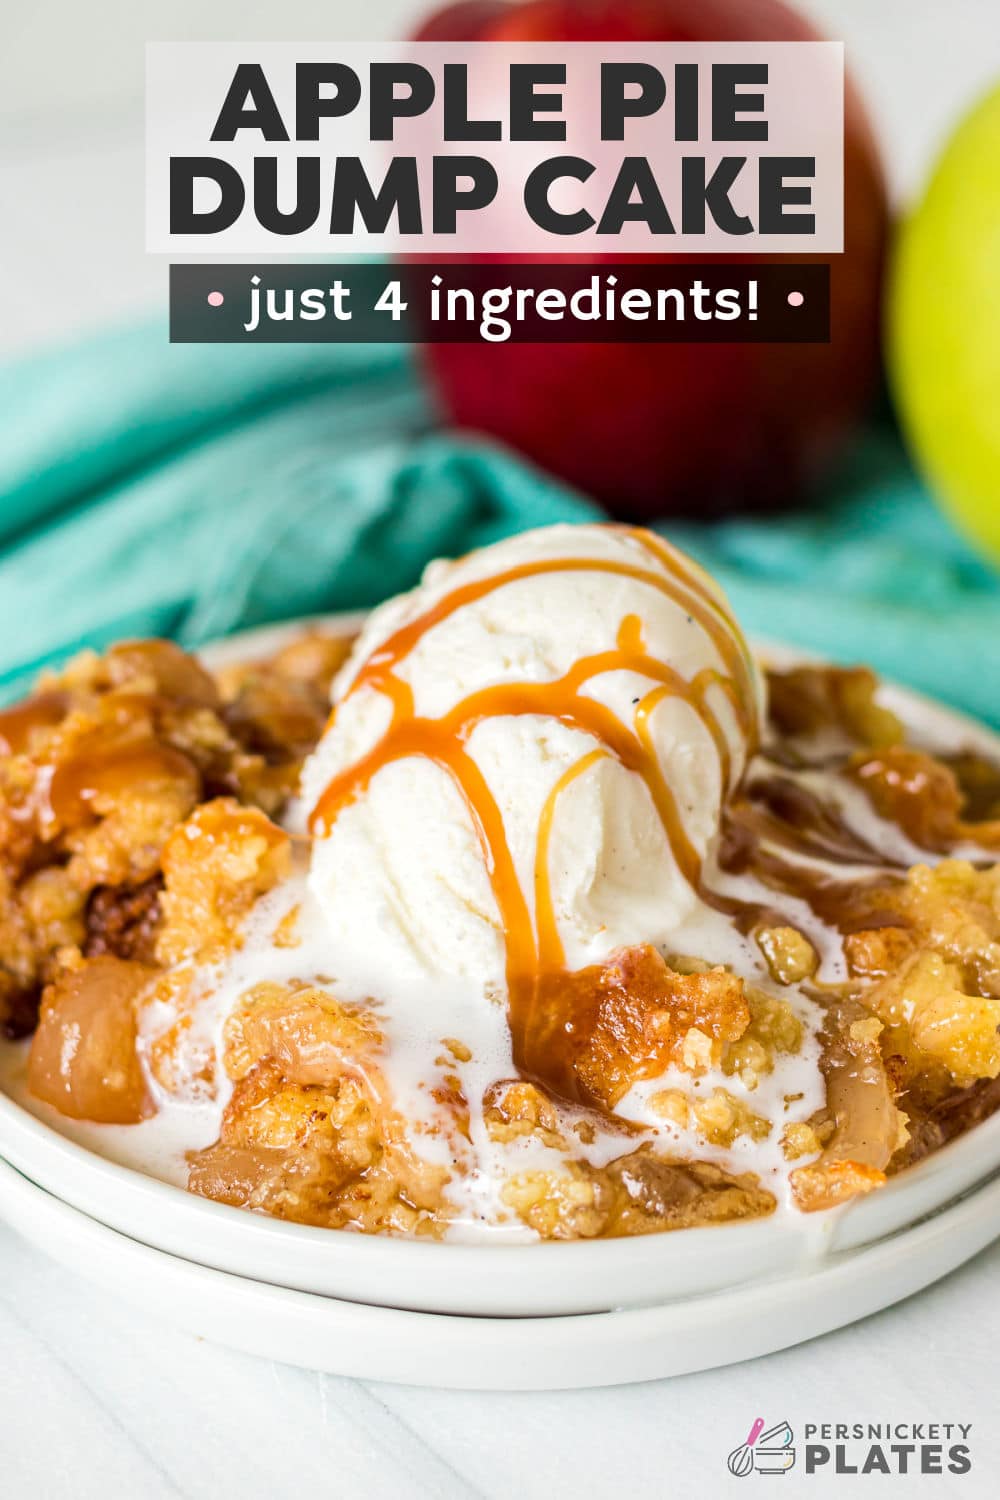 This easy 4 ingredient apple pie dump cake is made with a boxed cake mix, apple pie filling, butter, and cinnamon. It's a deconstructed (some might say lazy) version of a classic apple pie, including all of the traditional apple cinnamon flavors, but without the work of having to prepare a pie crust! | www.persnicketyplates.com